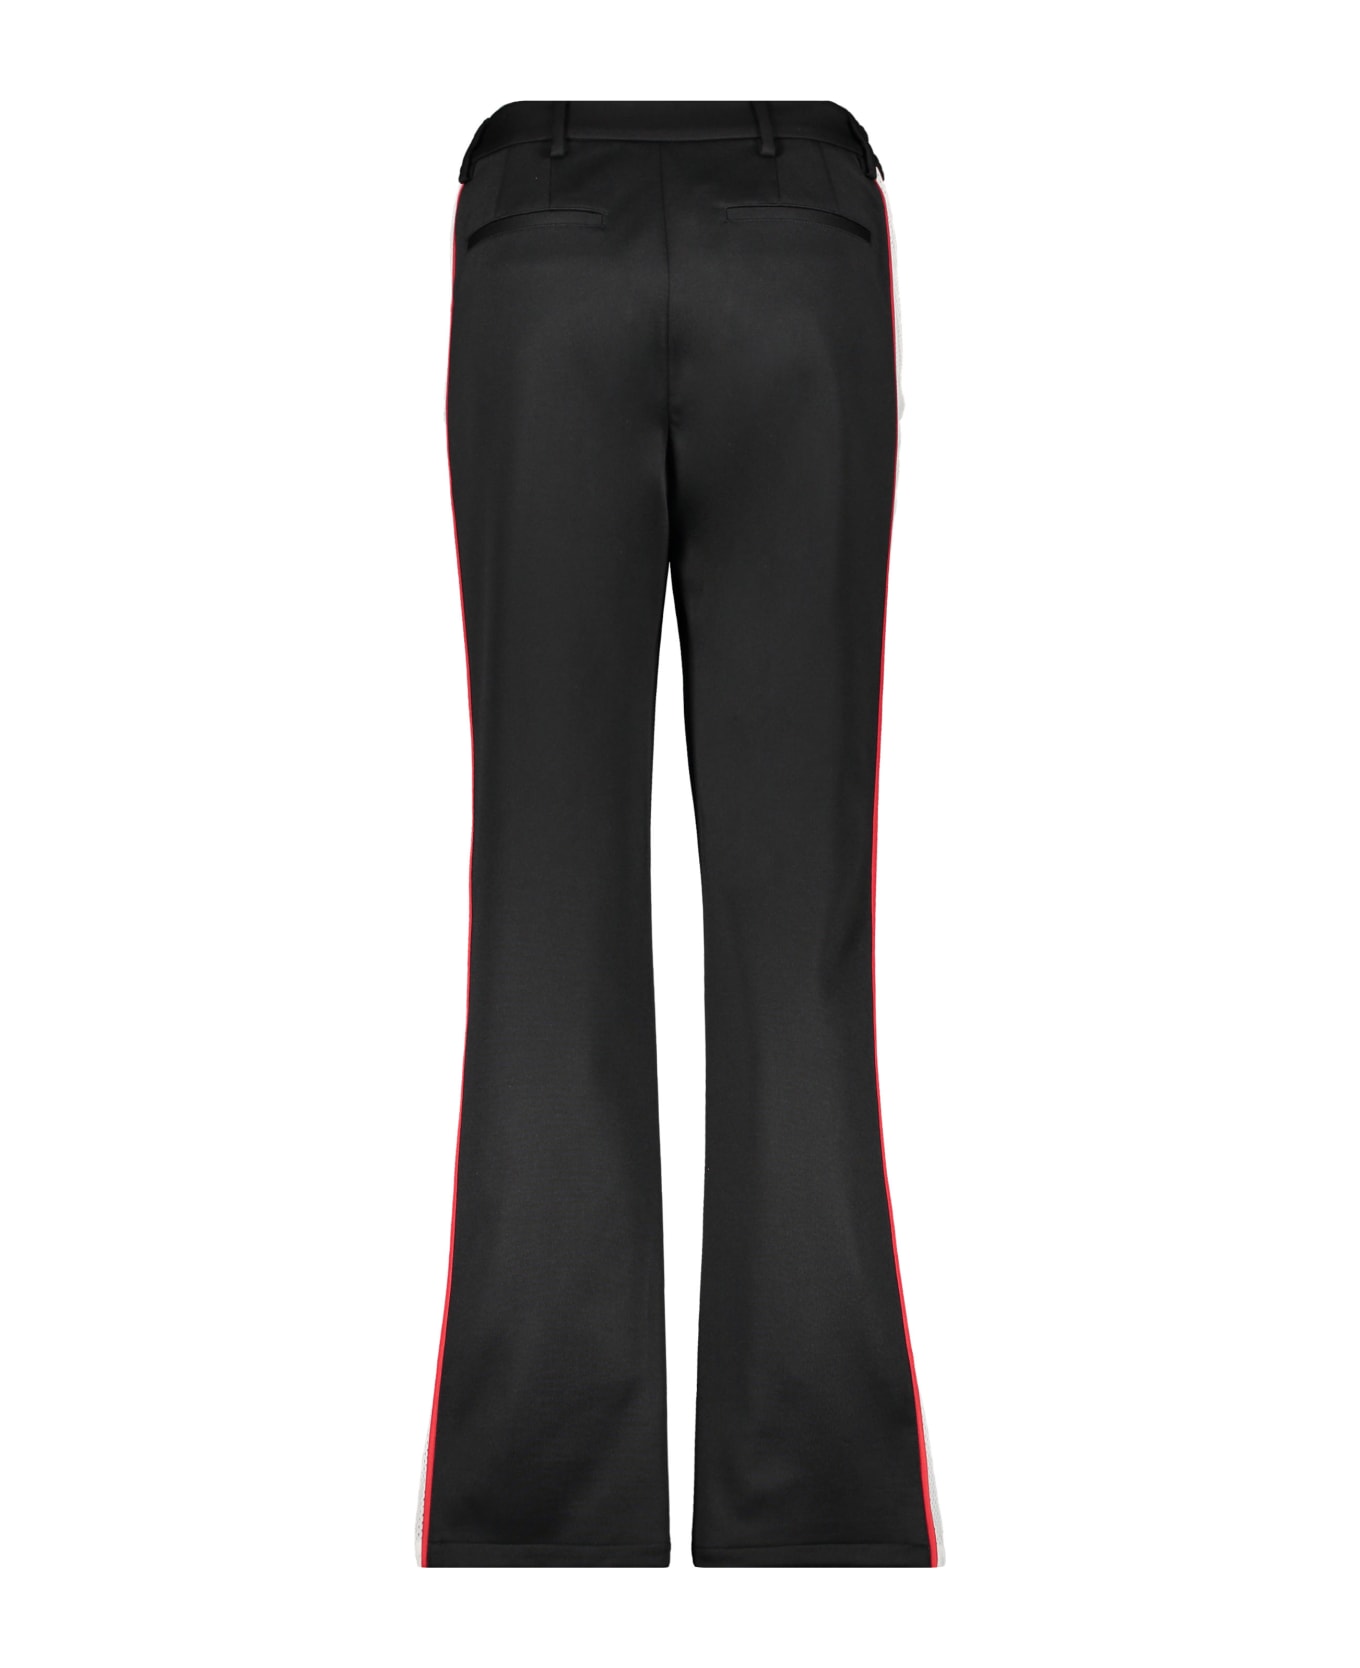 Burberry Contrast Side Stripes Trousers - black